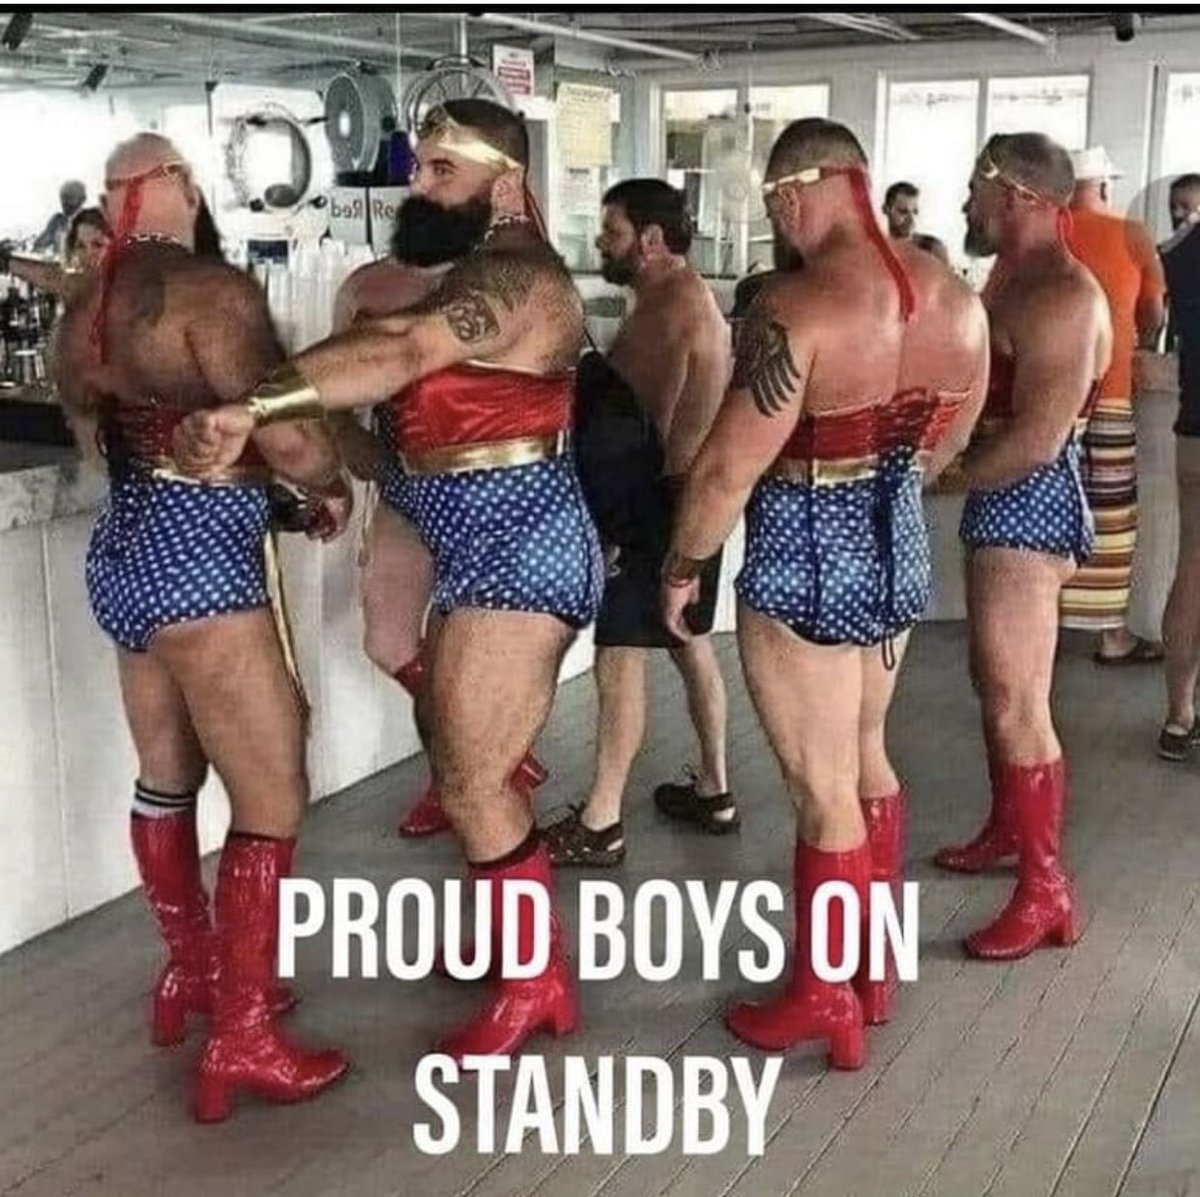 I’m so deliriously delighted that gay men gave hijacked the Proud Boys tag!This account is temporarily a proud boys stan account!I’m making a thread of this glorious event!Please share ALL the memes with me?   #ProudBoys